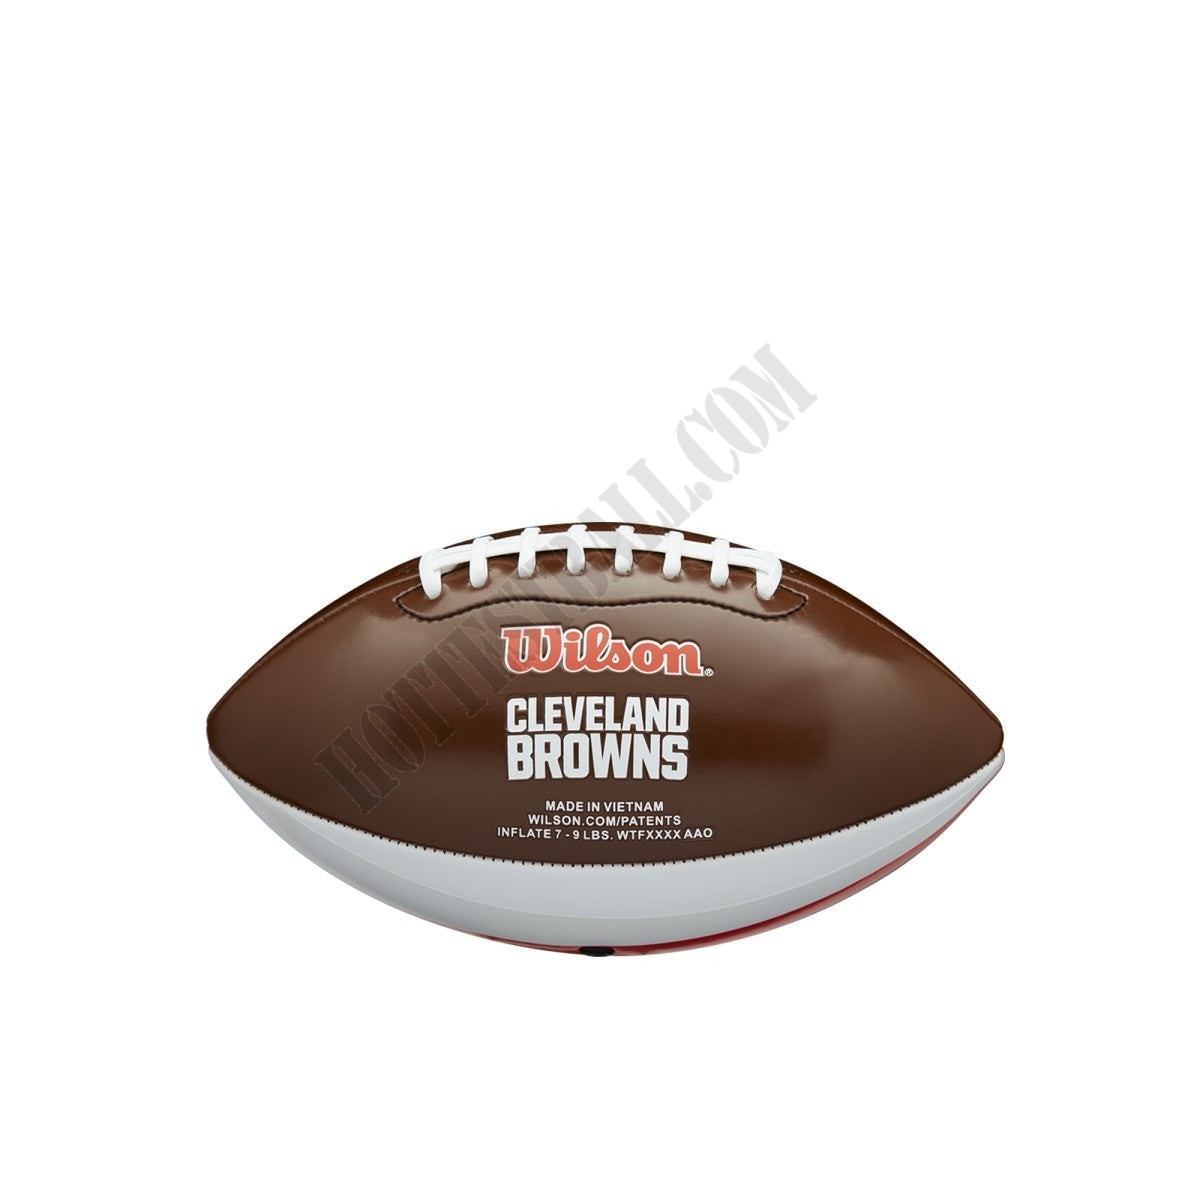 NFL City Pride Football - Cleveland Browns ● Wilson Promotions - -1